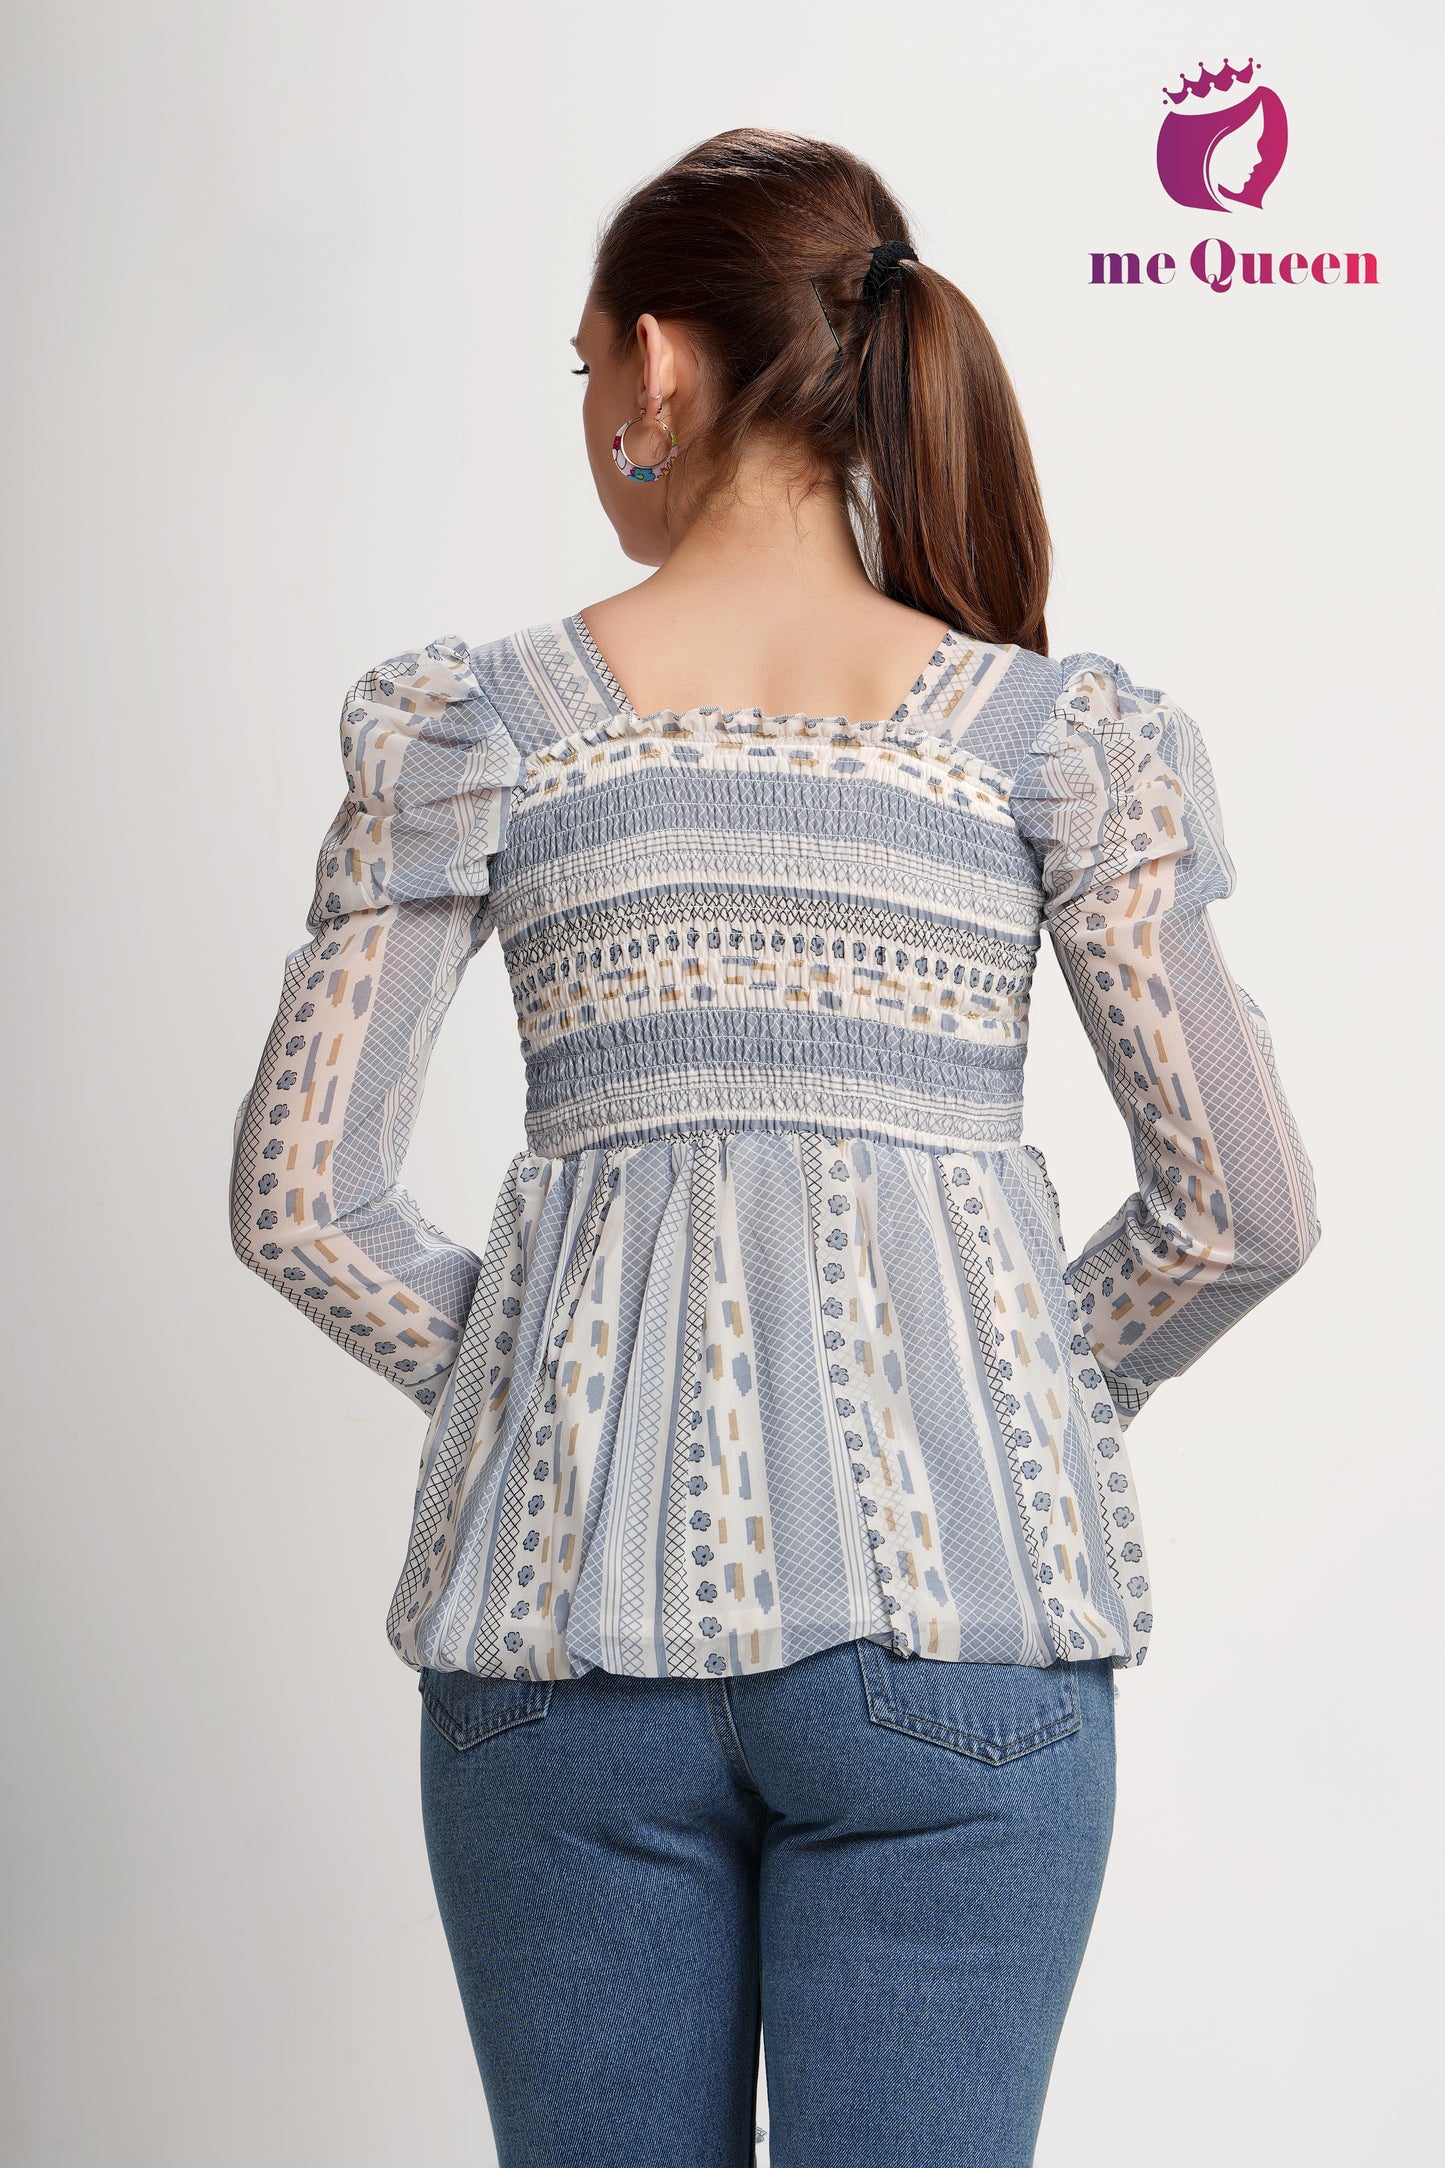 MeQueen's White & Blue Printed Peplum Top